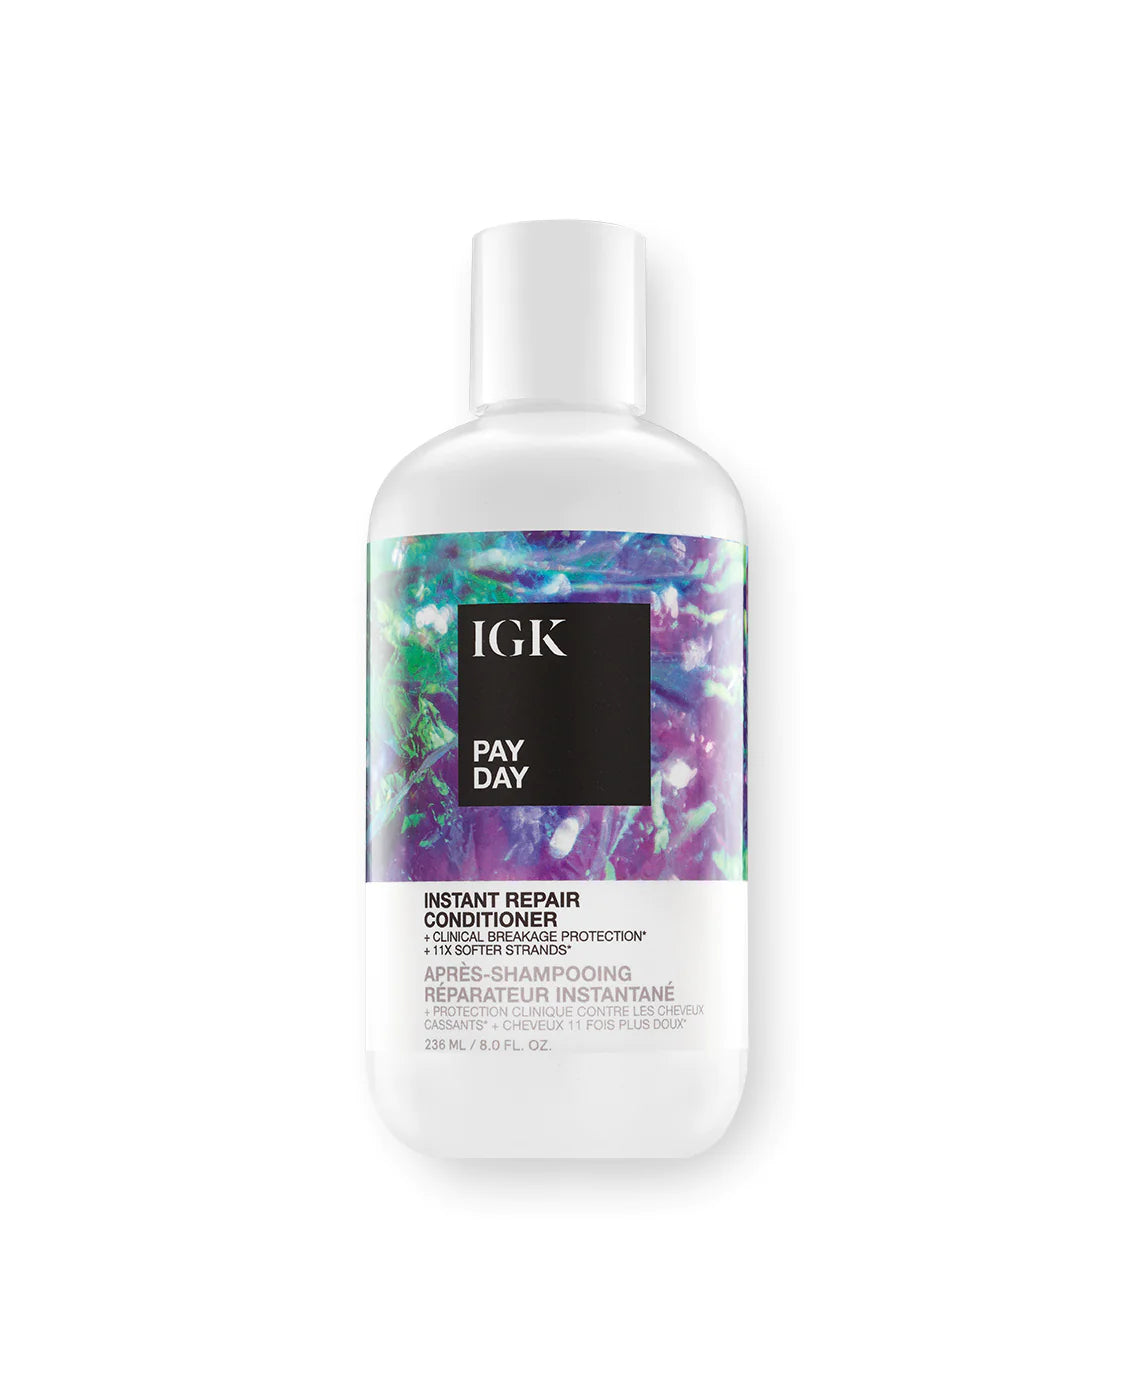 IGK PAY DAY Instant Repair Conditioner